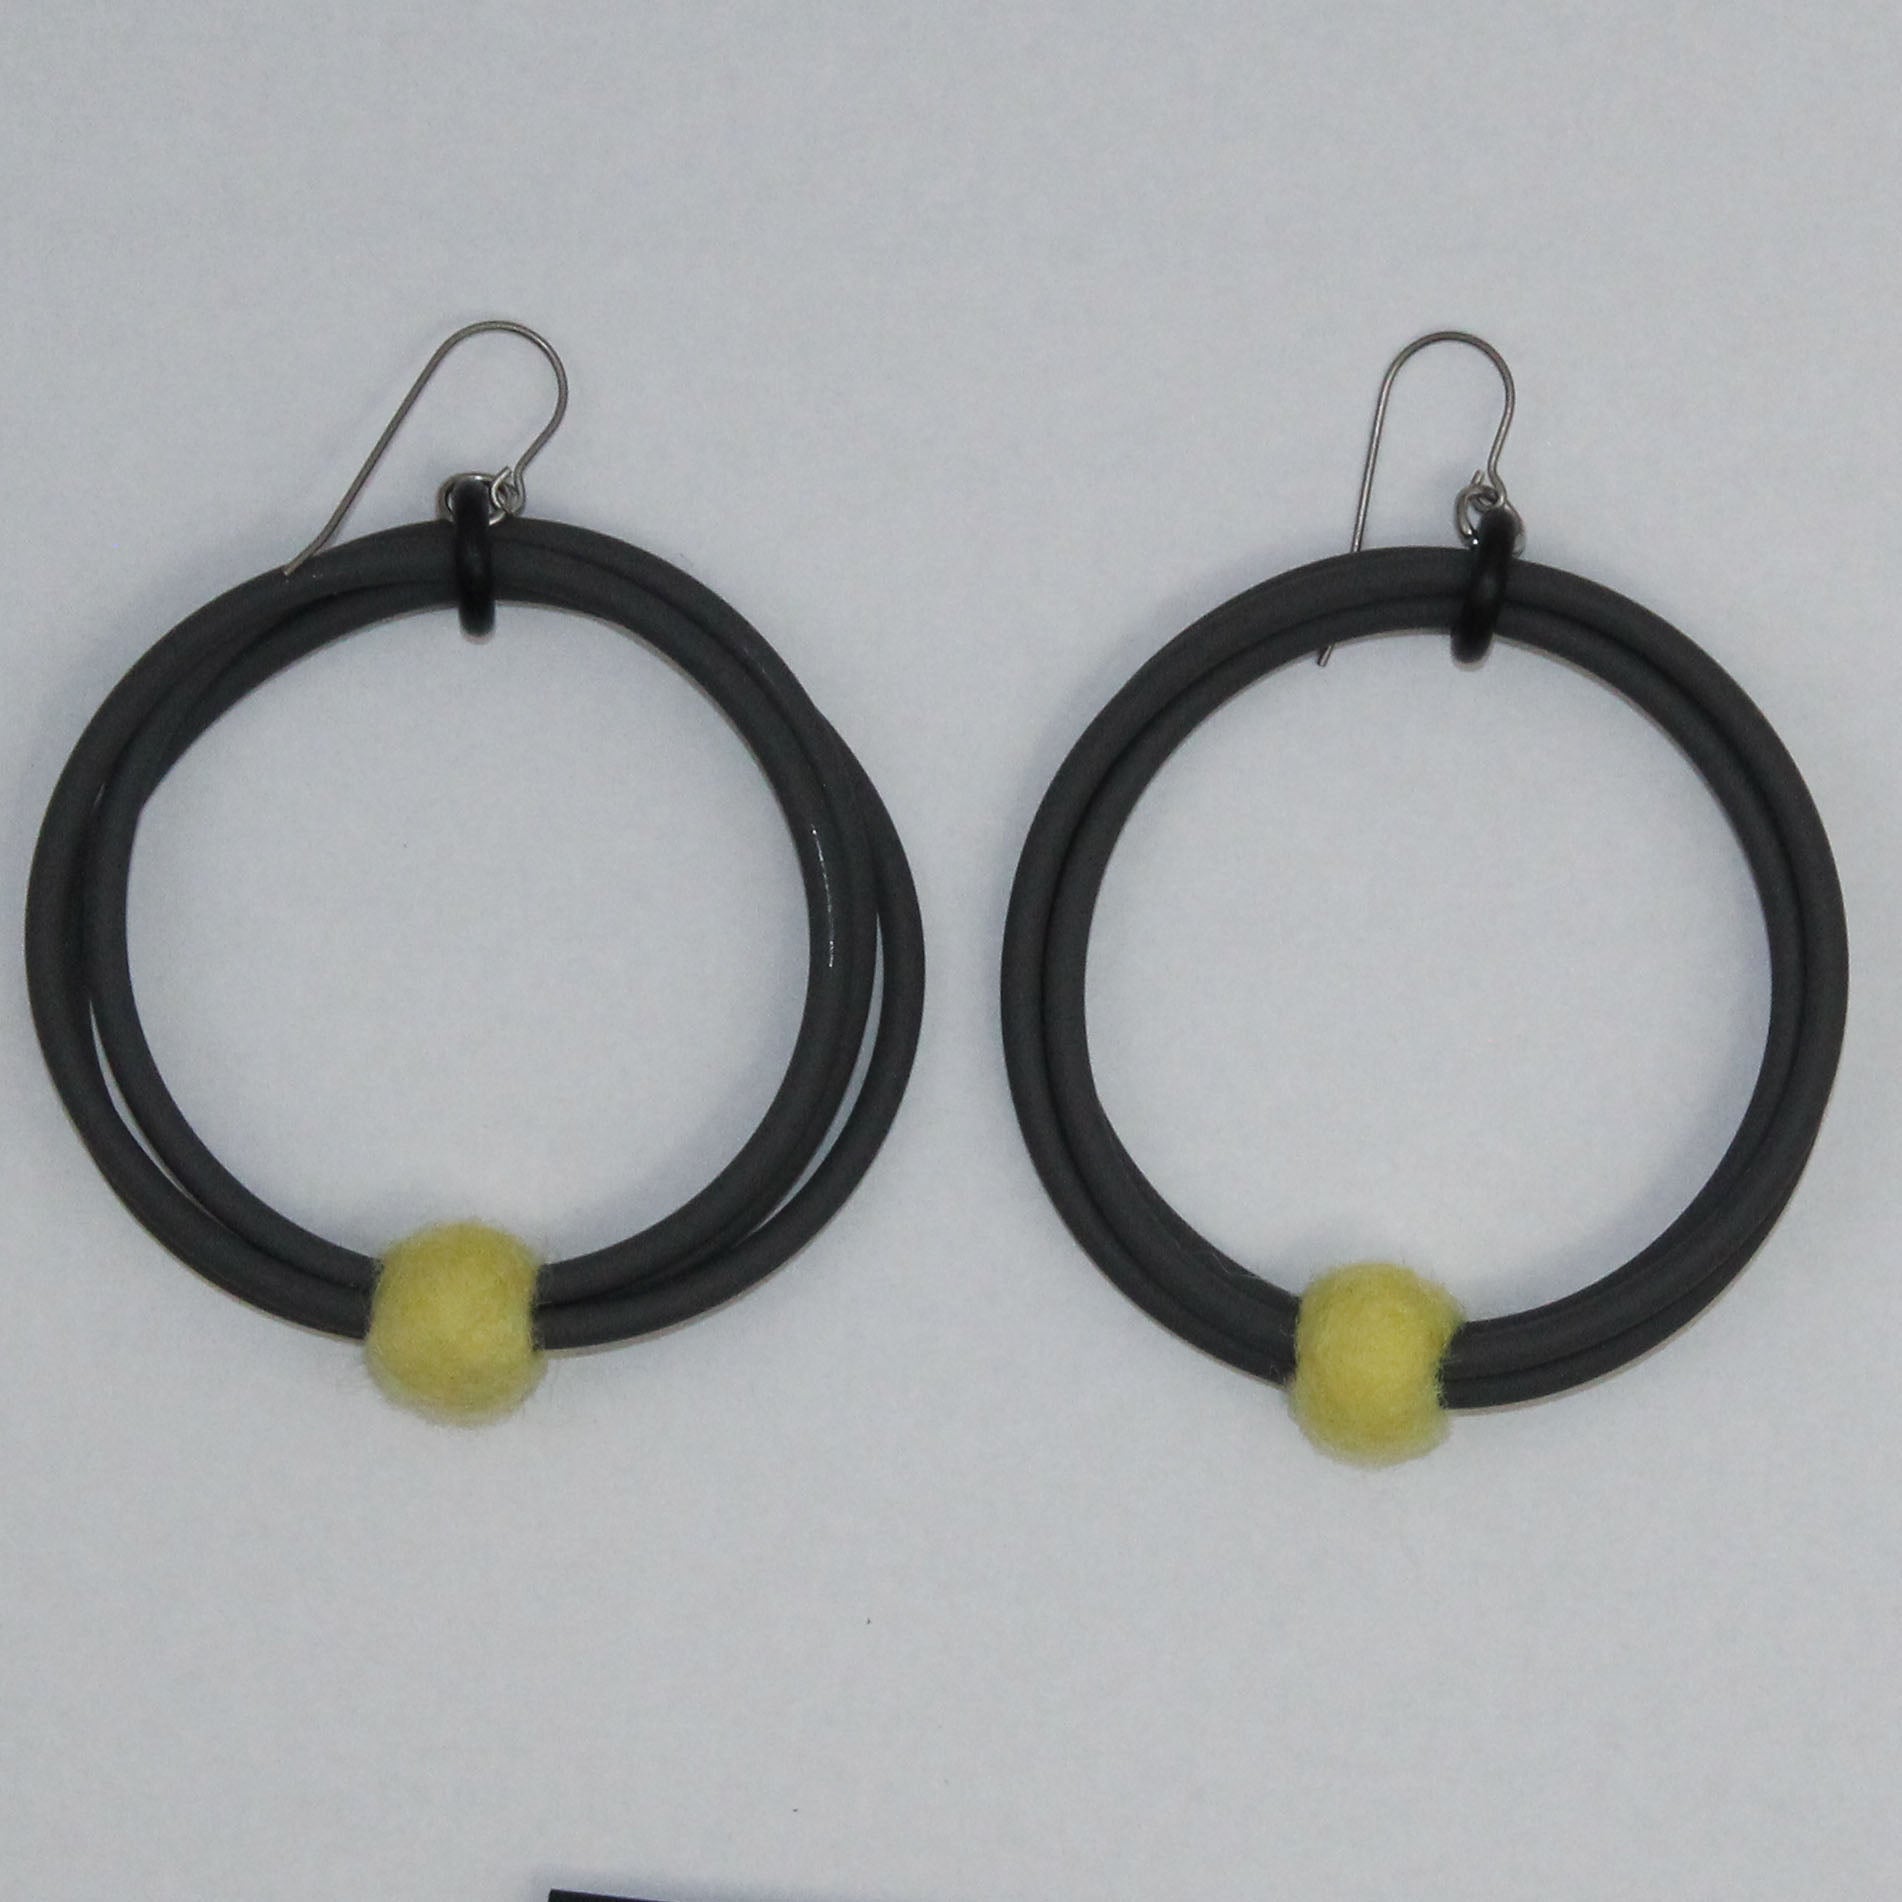 Frank Ideas Earrings, Round and Round, Grey/Yellow